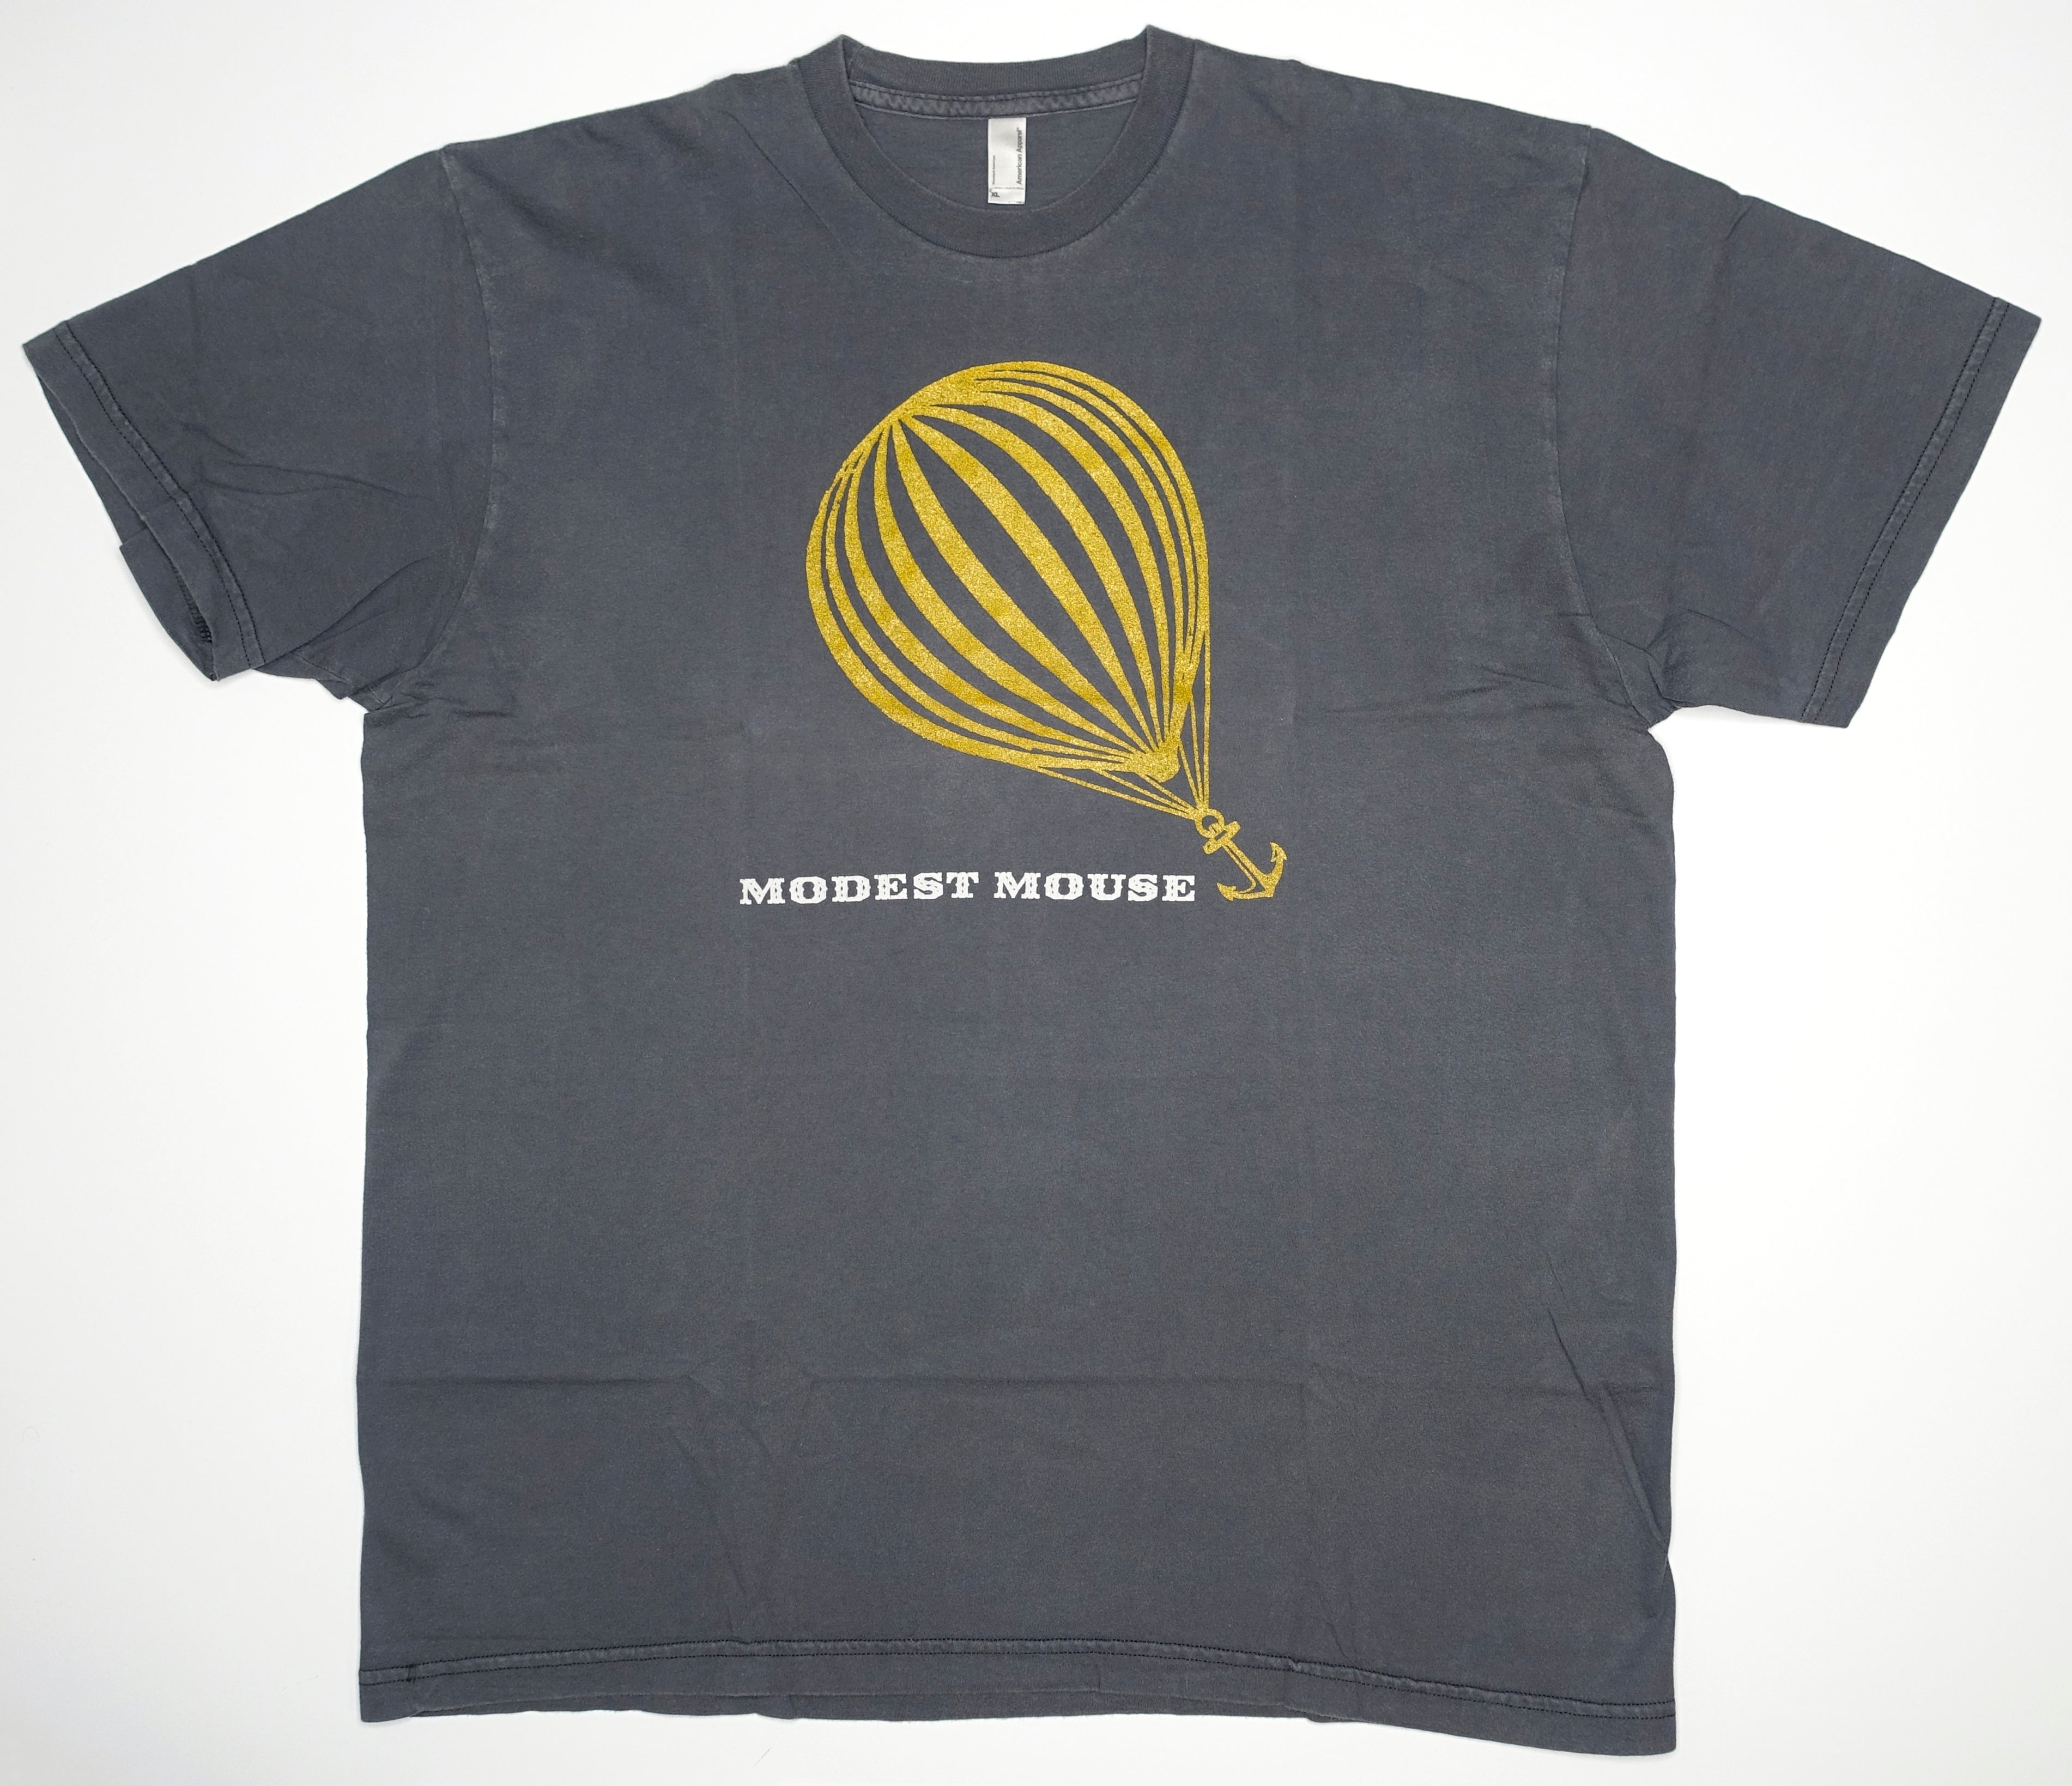 Modest Mouse - Missed the Boat 2007 Tour Charcoal Grey Shirt Size XL